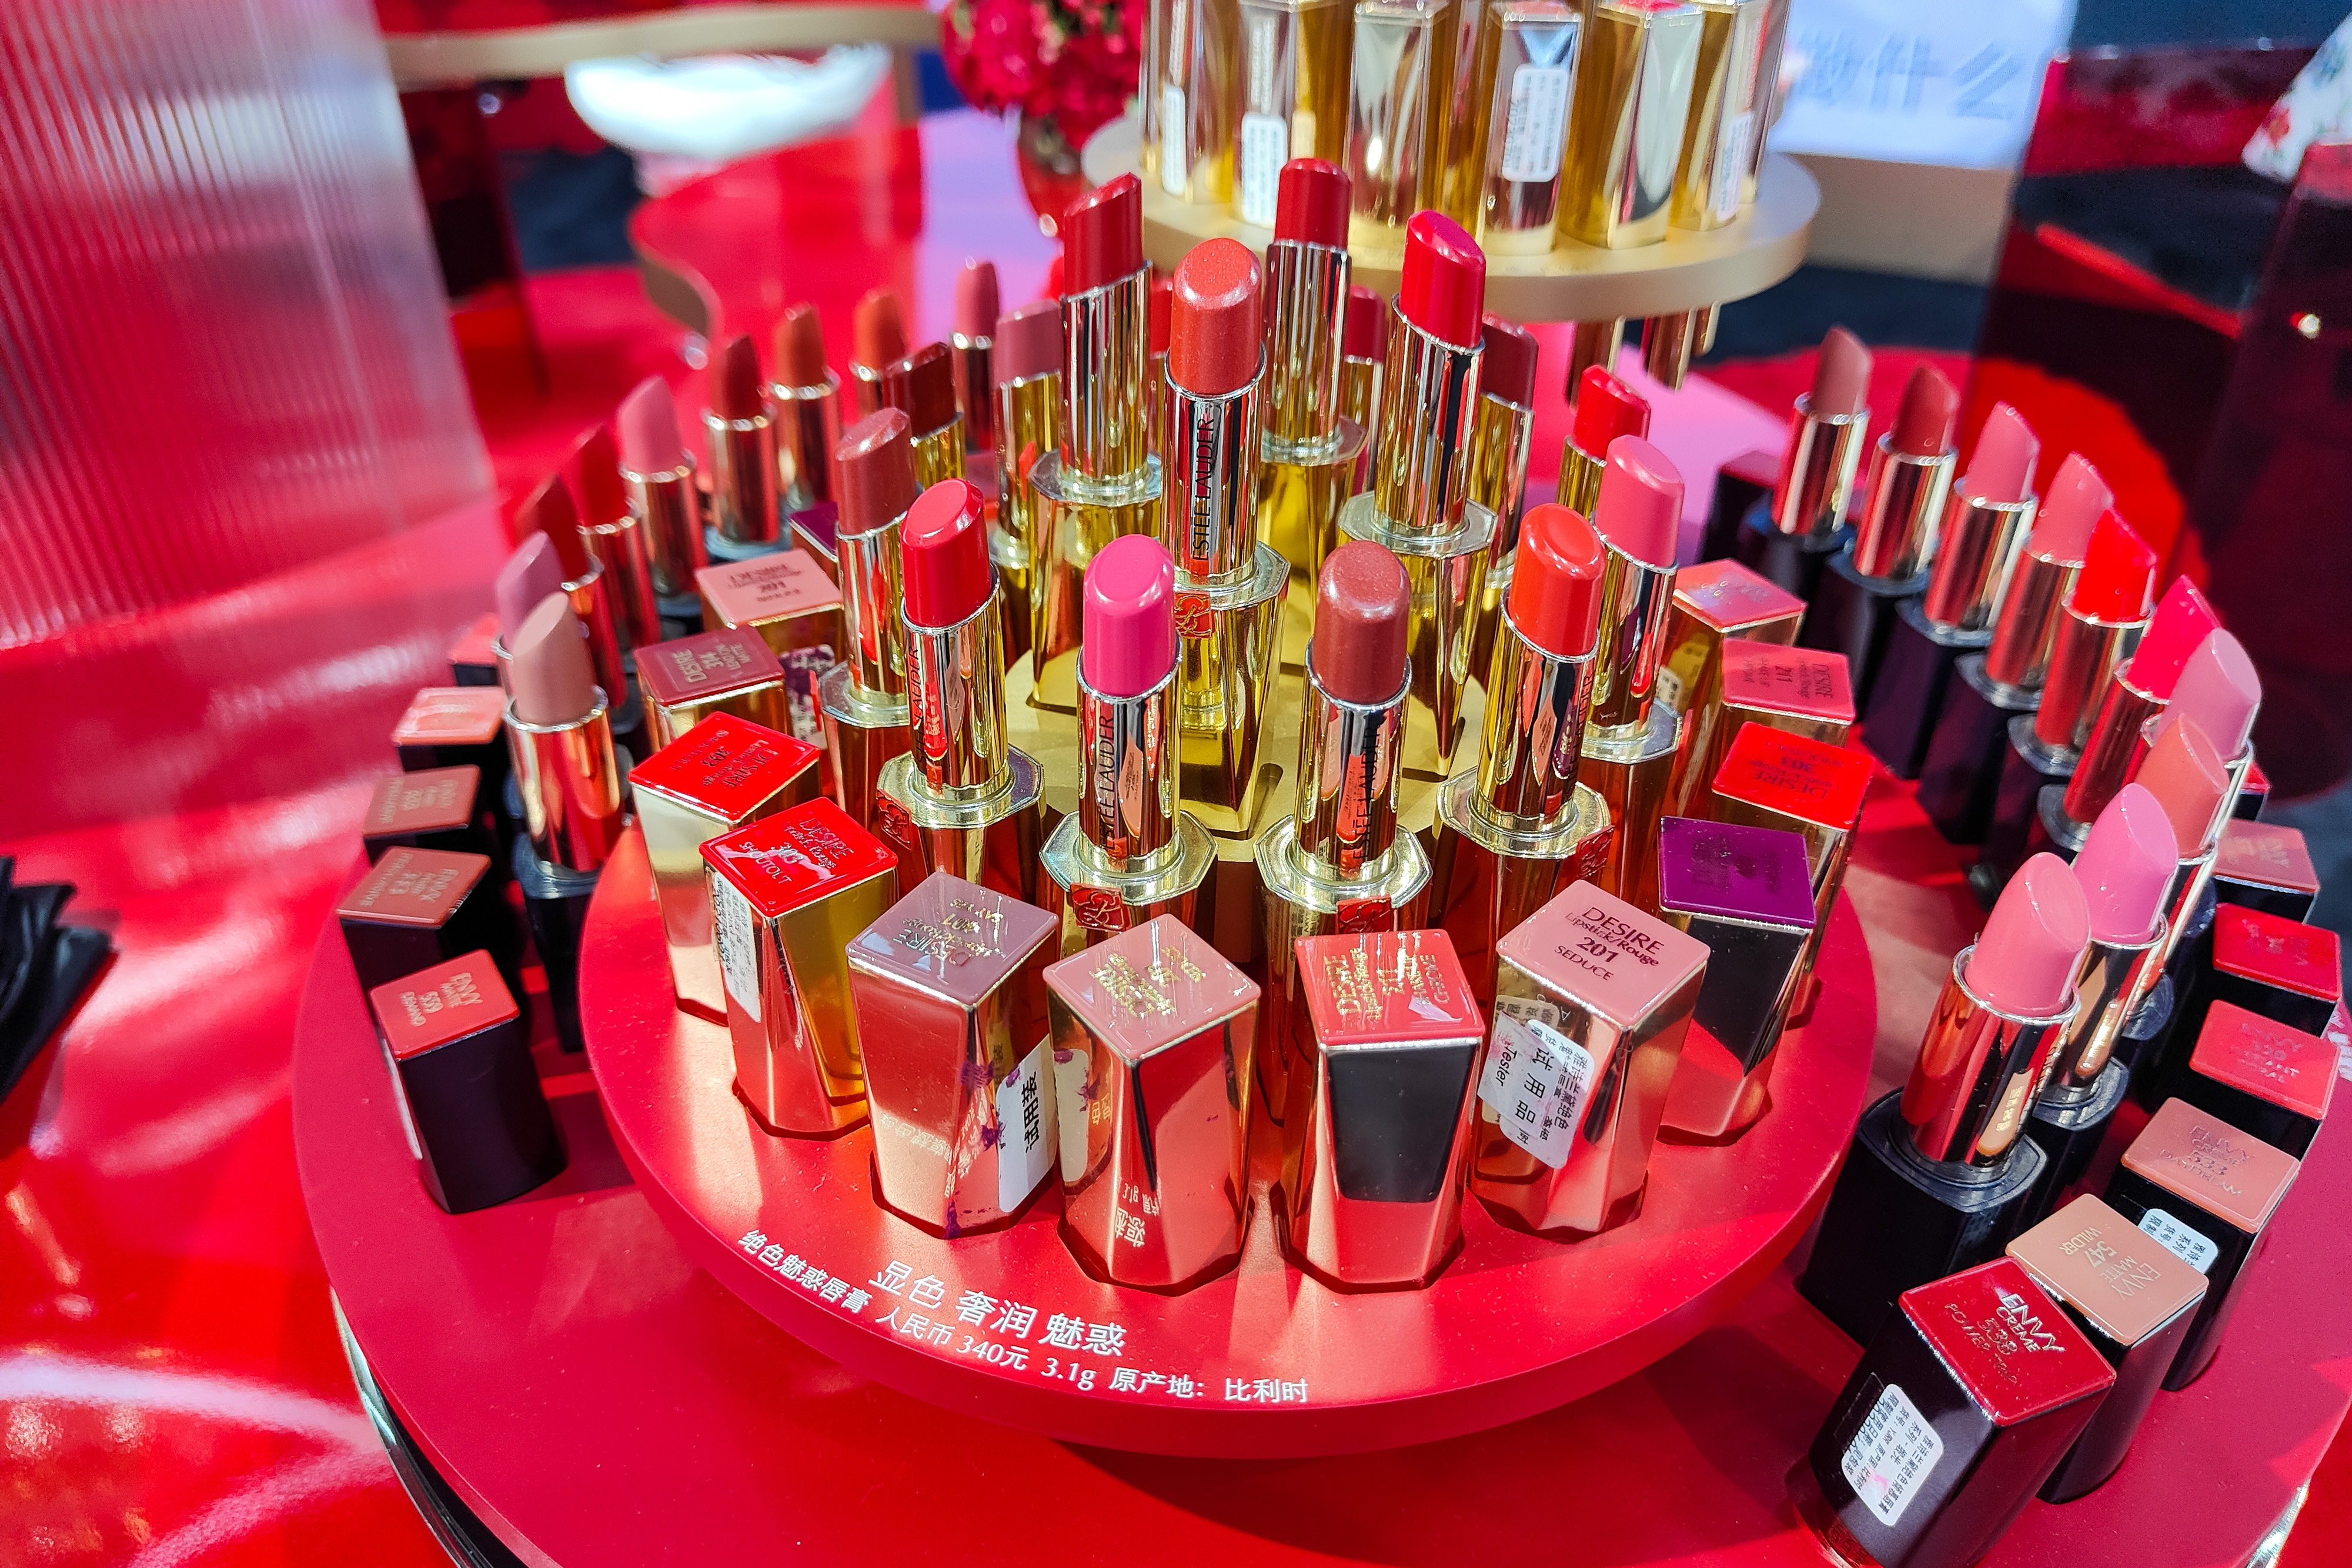 An Estee Lauder pop-up store is seen inside a department store on Nanjing Road, Shanghai, China, on August 6, 2021. Image: Getty Images